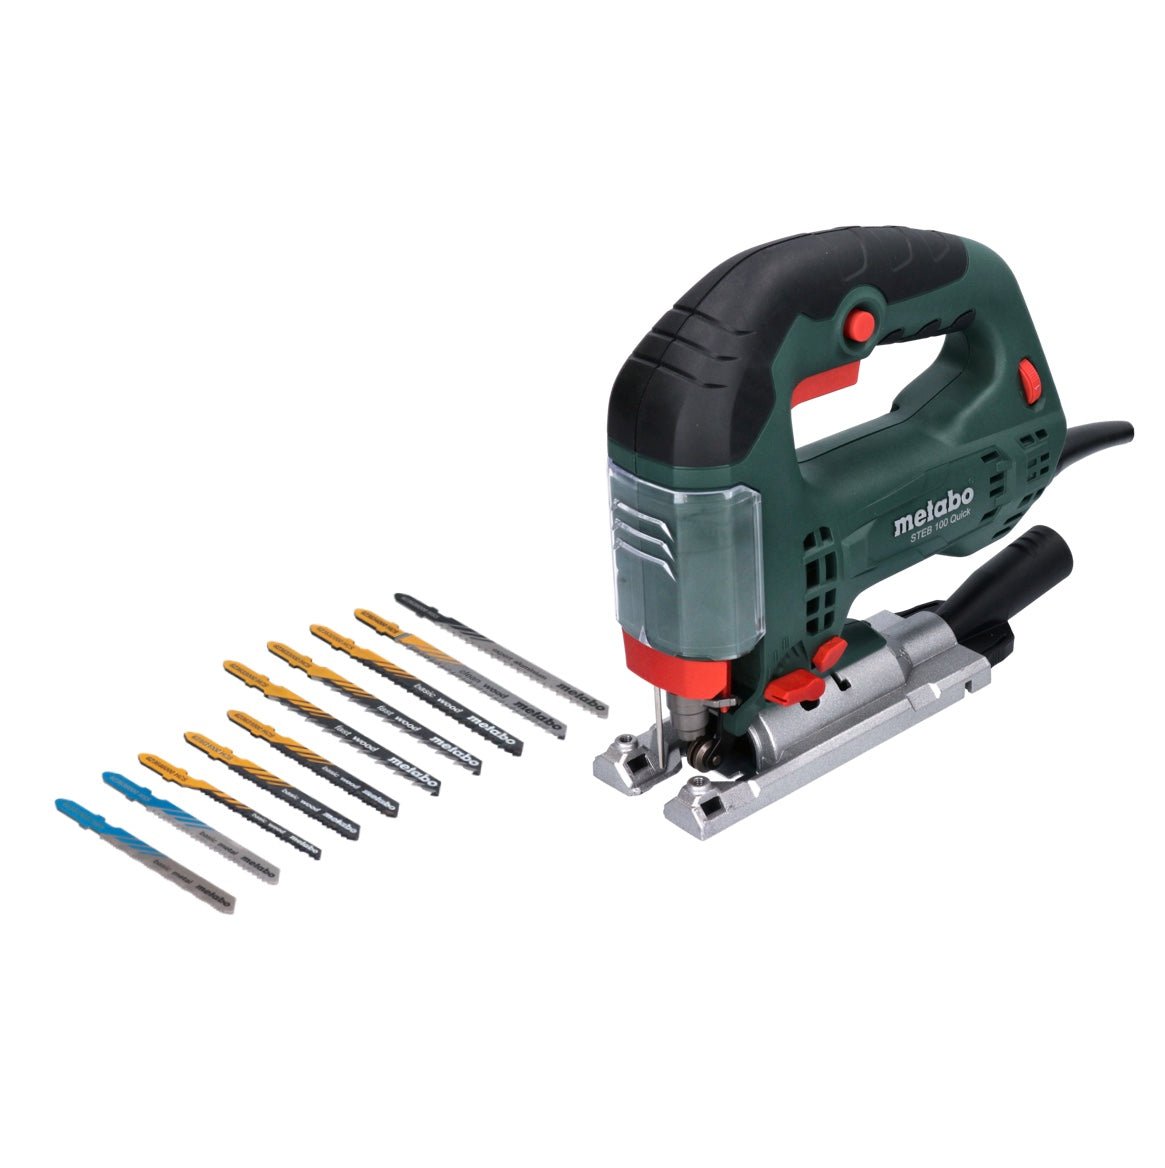 tlg. 10 ( 601110000 S mm W Toolbrothers 100 STEB Stichsäge 100 – Quick 710 + Metabo )